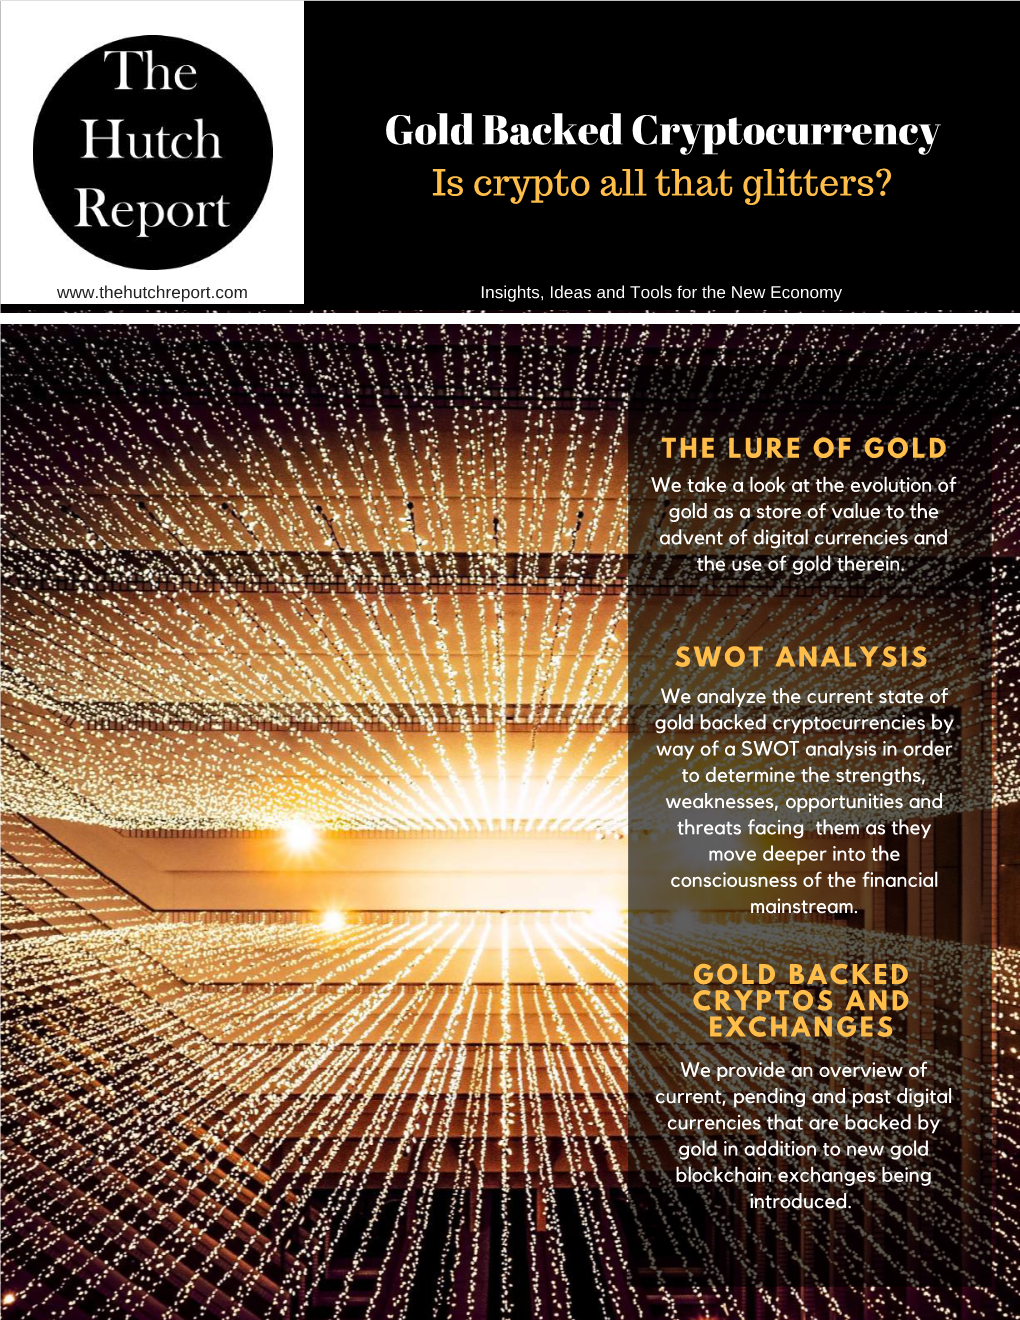 Gold Backed Cryptocurrency Is Crypto All That Glitters?